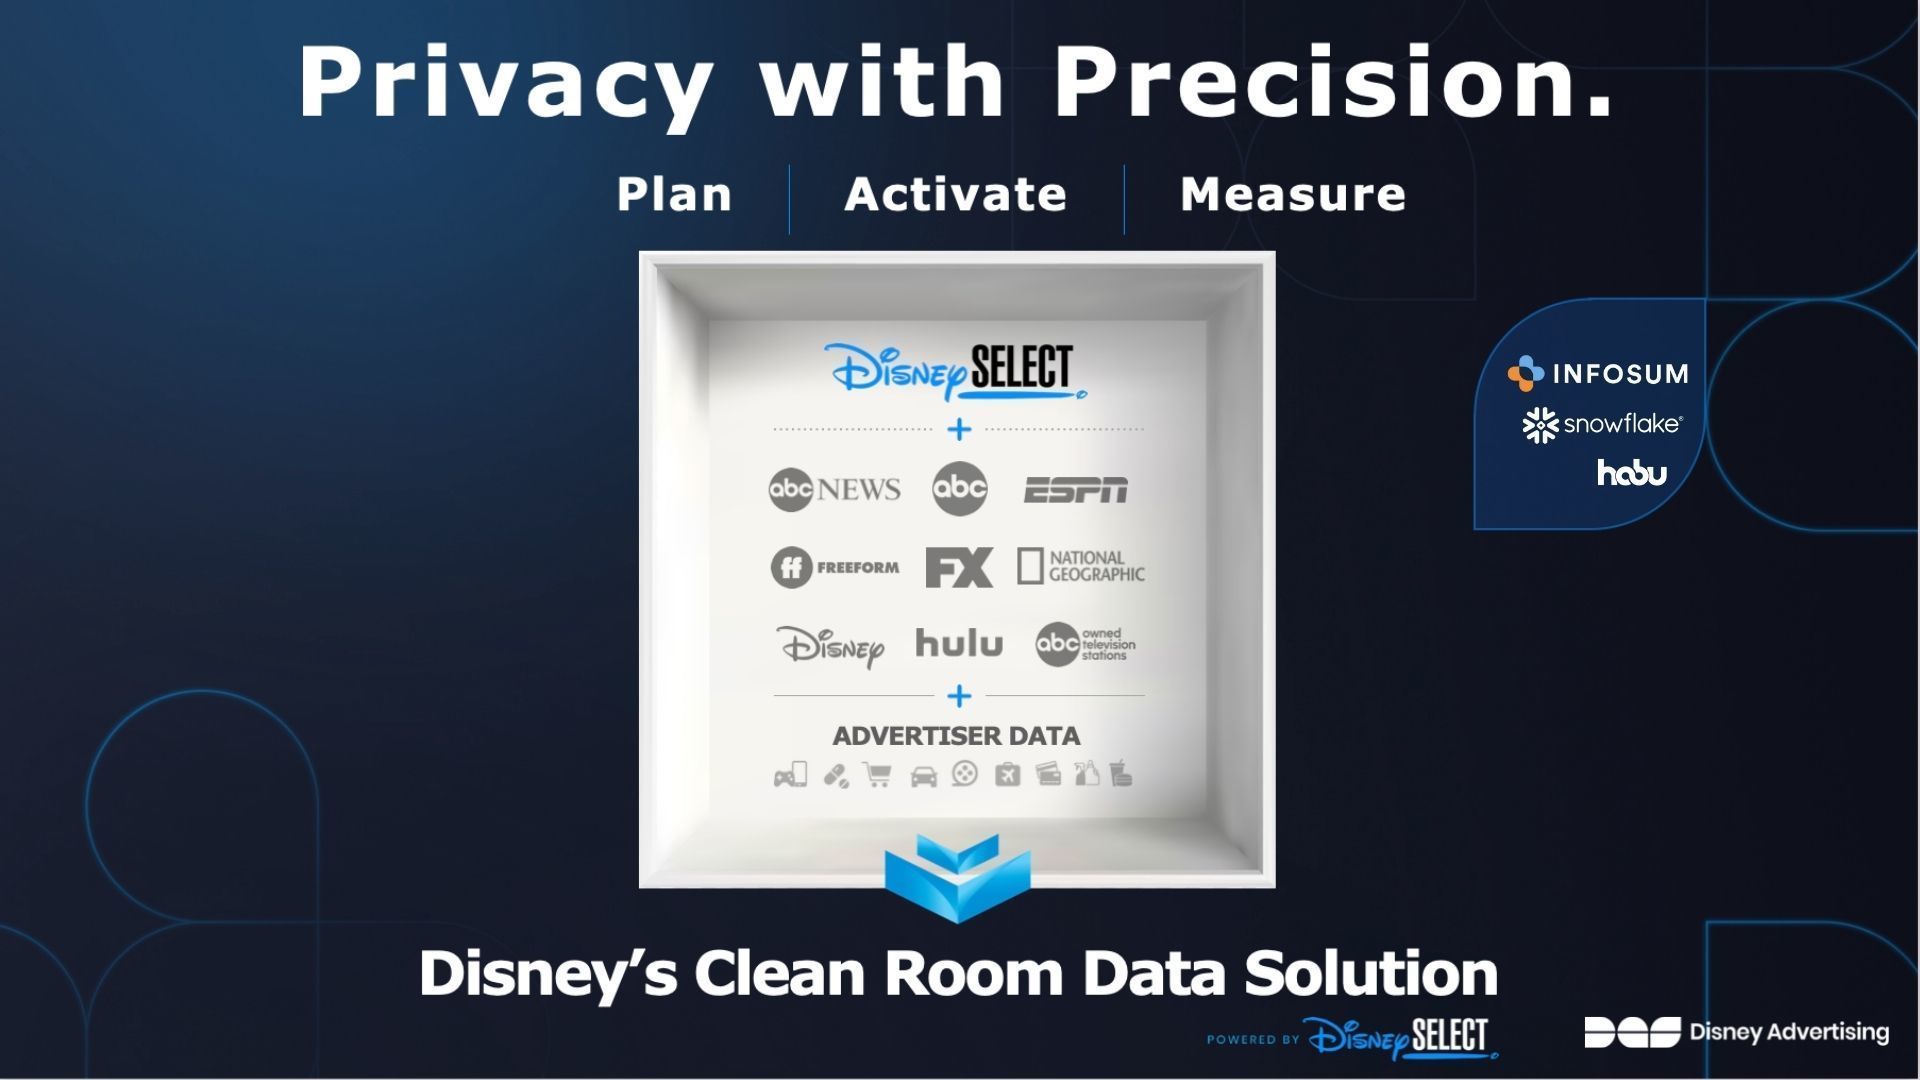 Disney’s Proprietary Clean Room Data Solution Sets Its Sights on Measurement & Activation 